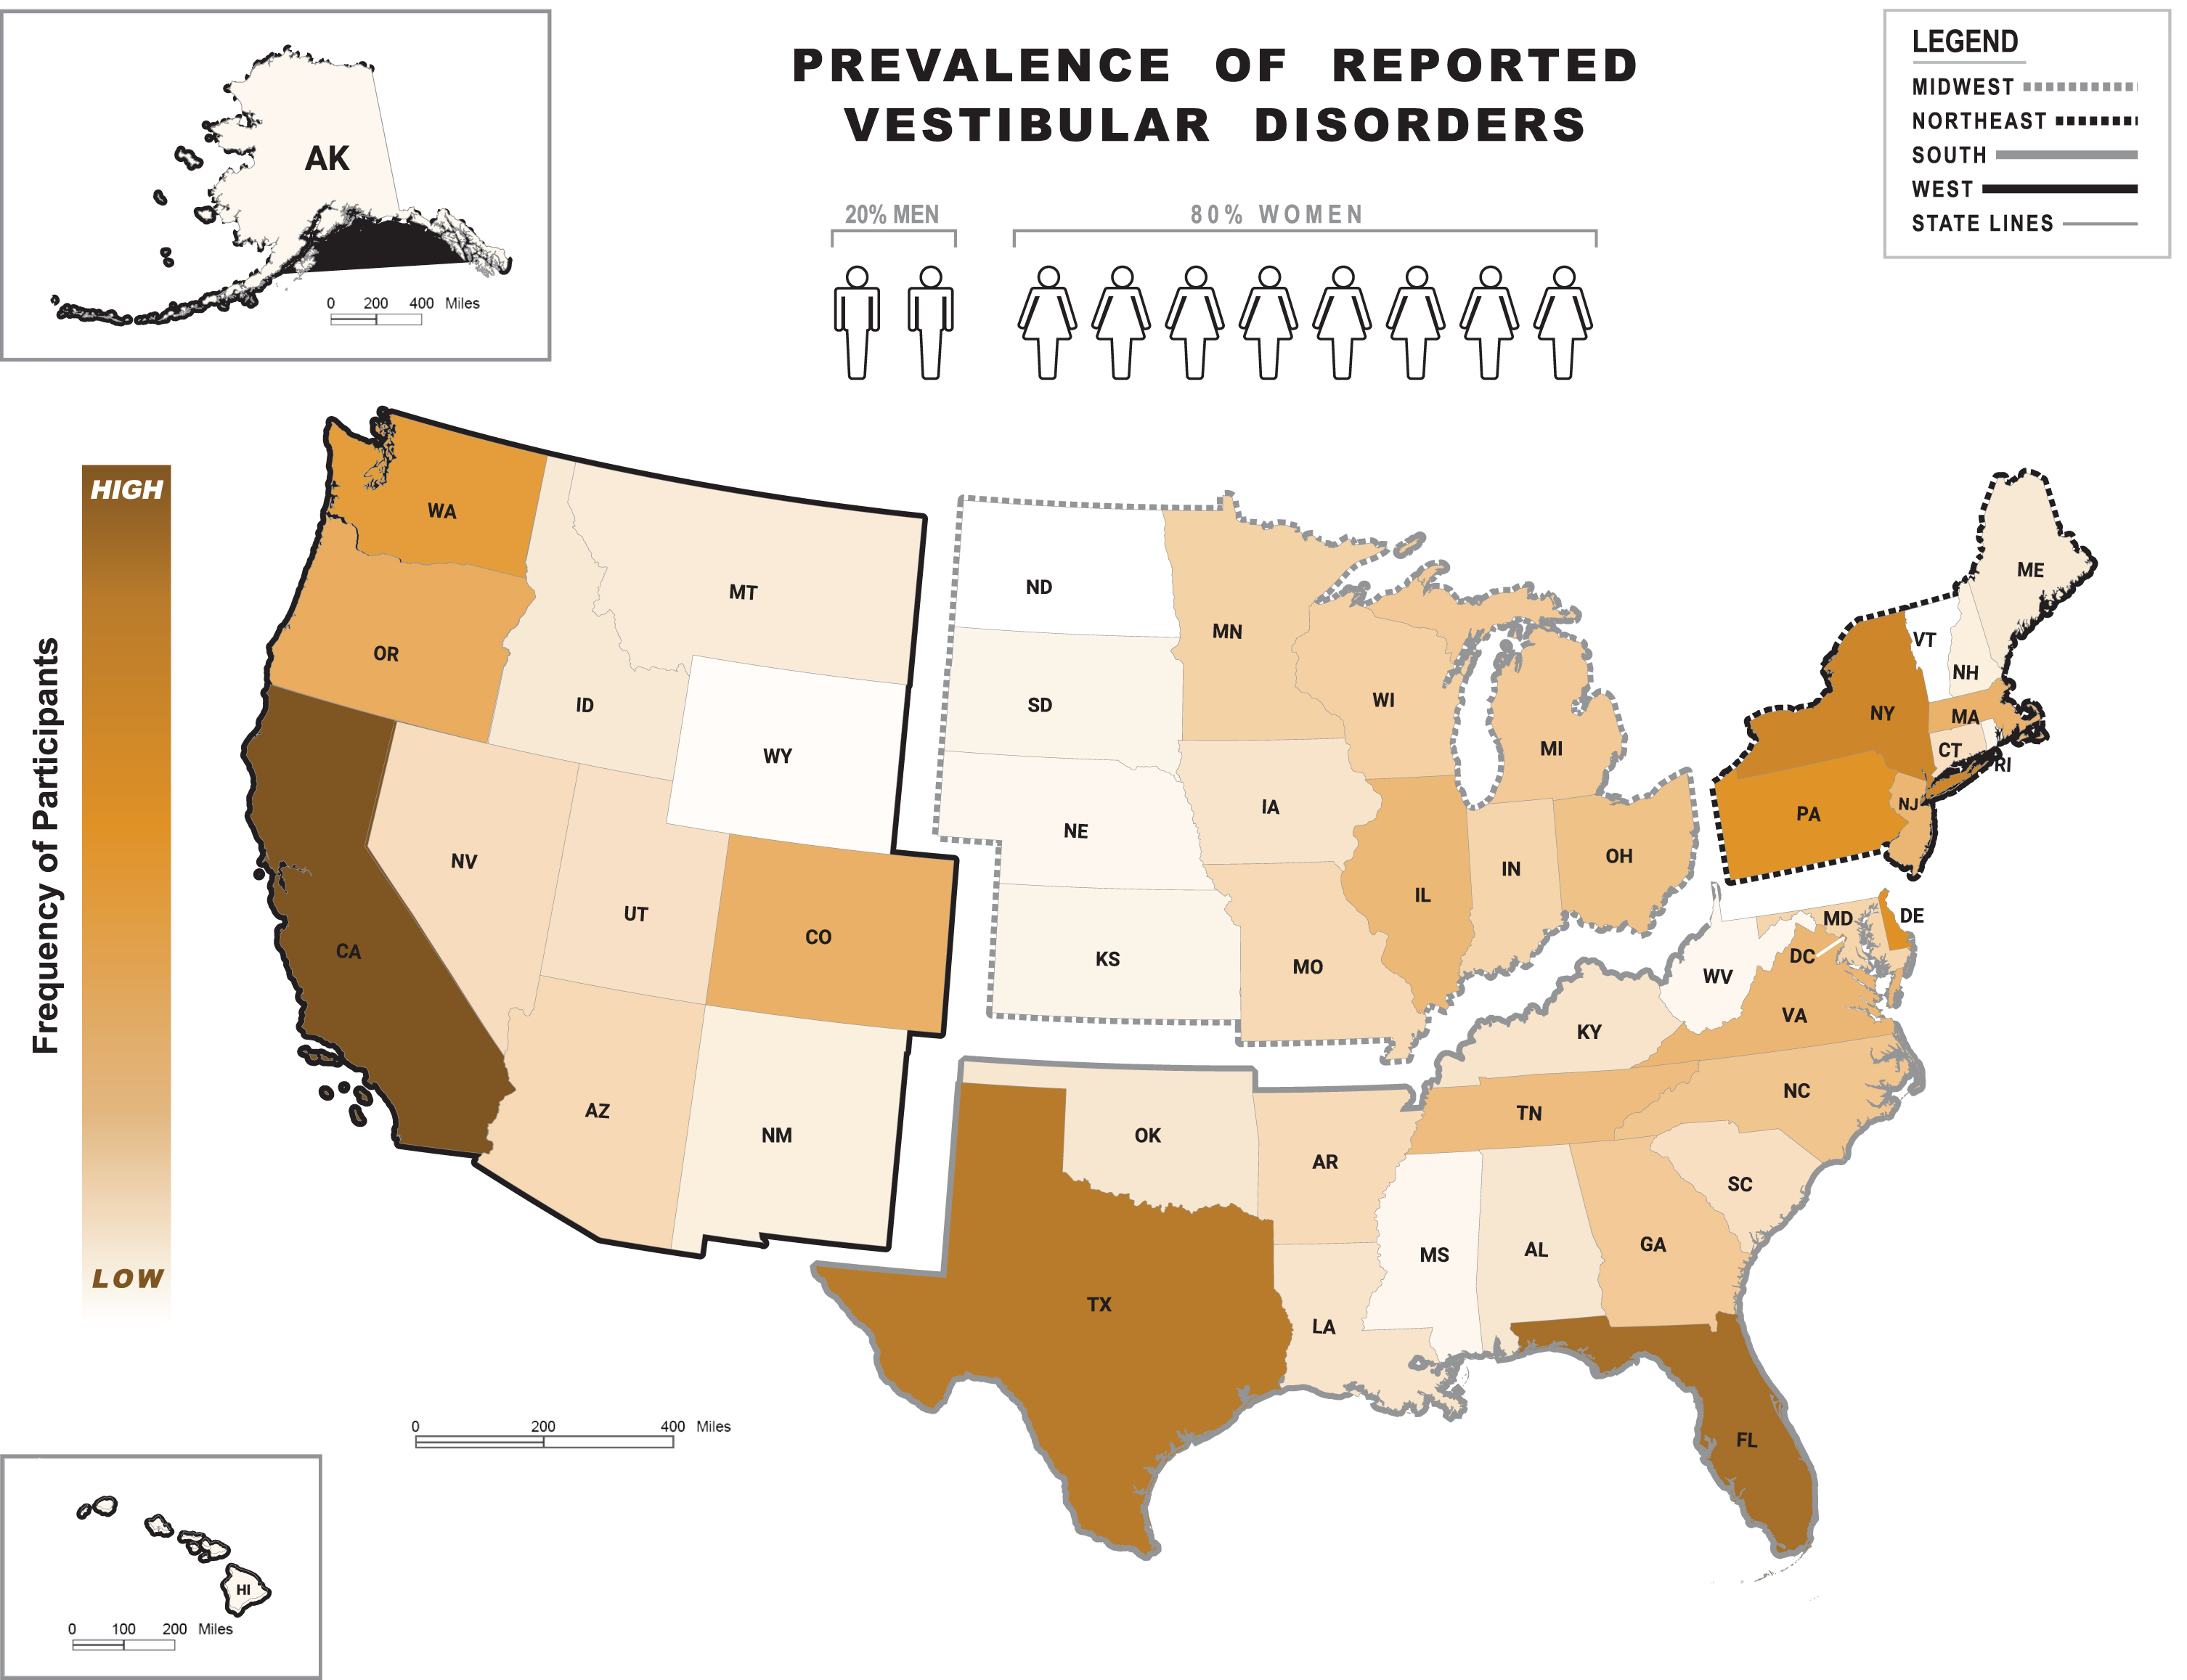 Frequency of self-reported vestibular diagnoses. Heat map on the frequency of reported vestibular diagnoses across regions of the United States (US) as per the 2020 United States Census Bureau: West, Midwest, Northeast and South. Abbreviations shown refer to the following states (in alphabetical order): Alabama (AL), Alaska (AK), Arizona (AR), Arkansas (AK), California (CA), Colorado (CO), Connecticut (CT), Delaware (DE), Florida (FL), Georgia (GA), Hawaii (HI), Idaho (ID), Illinois (IL), Indiana (IN), Iowa (IA), Kansas (KS), Kentucky (KY), Louisiana (LA), Maine (ME), Maryland (MD), Massachusetts (MA), Michigan (MI), Minnesota (MN), Mississippi (MS), Missouri (MO), Montana (MT), Nebraska (NE), Nevada (NV), New Hampshire (NH), New Jersey (NJ), New Mexico (NM), New York (NY), North Carolina (NC), North Dakota (ND), Ohio (OH), Oklahoma (OK), Oregon (OR), Pennsylvania (PA), Rhode Island (RI), South Carolina (SC), South Dakota (SD), Tennessee (TN), Texas (TX), Utah (UT), Vermont (VT), Virginia (VA), Washington (WA), West Virginia (WV), Wisconsin (WI), Wyoming (WY). Color shade levels within states refer to the low-to-high (light-to-dark, respectively) frequency range of vestibular diagnoses. Shade levels are based on the percent of people with vestibular diagnoses in each state ranging from 0.1% (WY) to 10.1% (CA) out of the country’s total percentage. States with no shade (white color, e.g., ND and VT) had no respondents. The human symbols refer to the female (82%) versus male (18%) proportion in a sample of 905 participants based in the US and with complete information on the Dizziness Questionnaire*.